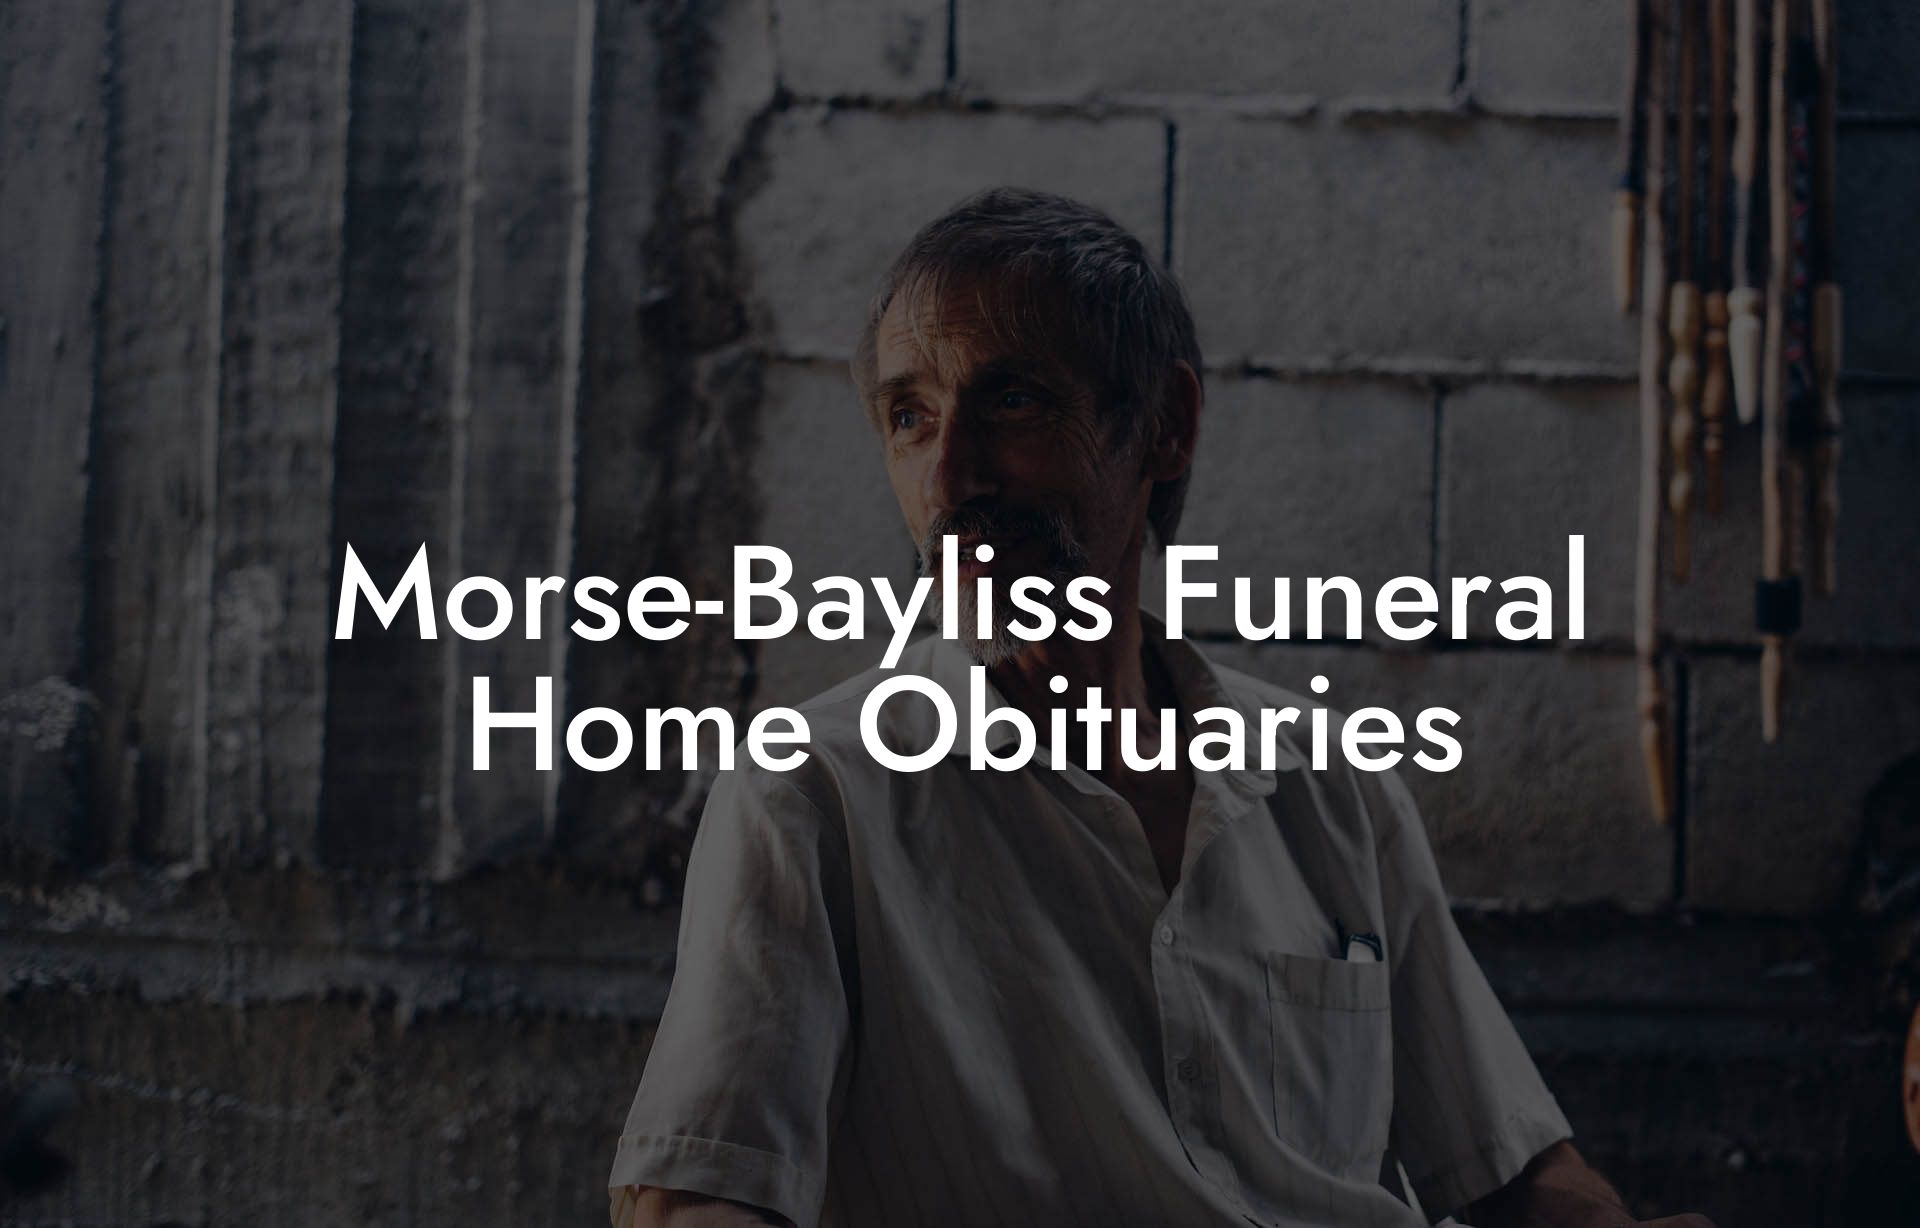 Morse-Bayliss Funeral Home Obituaries